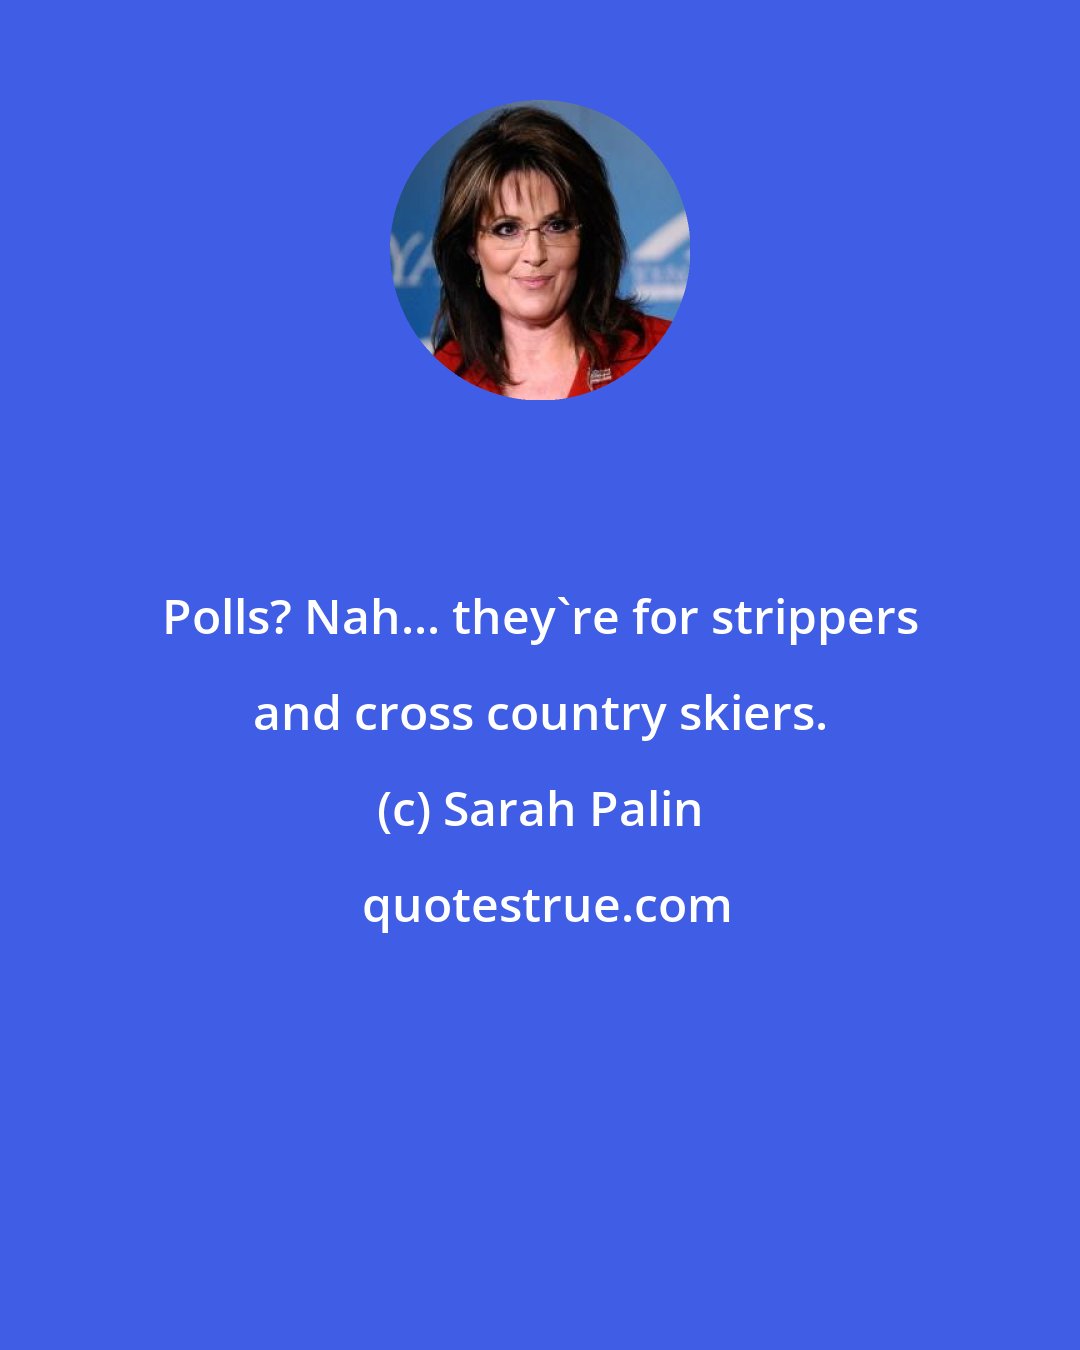 Sarah Palin: Polls? Nah... they're for strippers and cross country skiers.